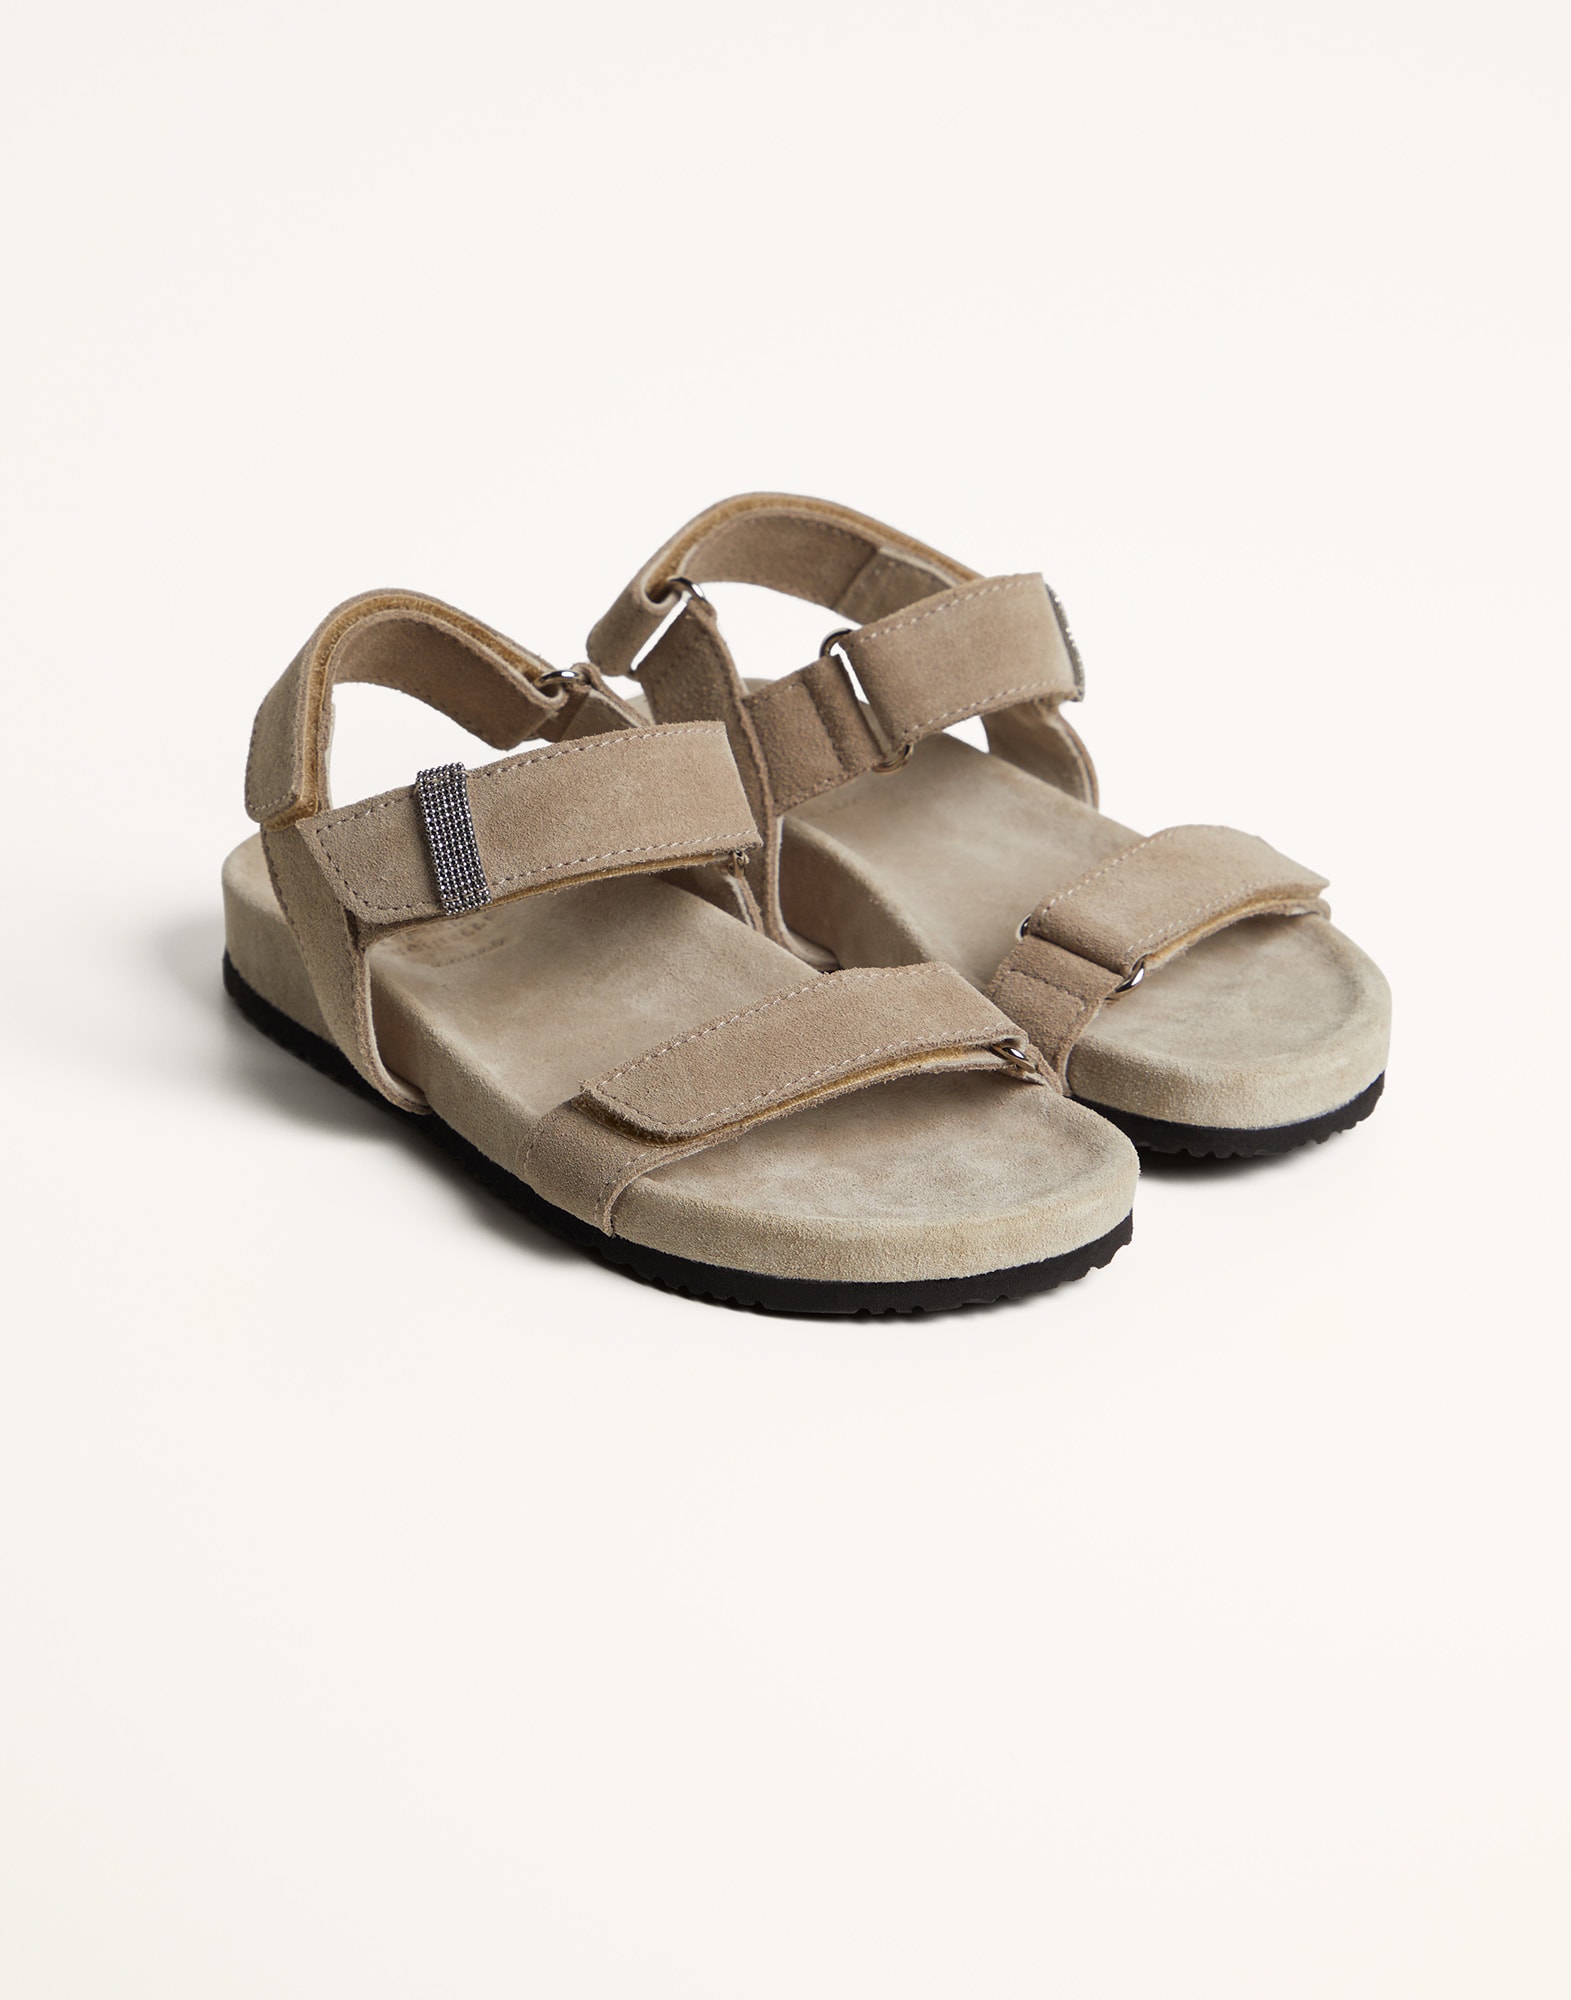 Sandals - Front view